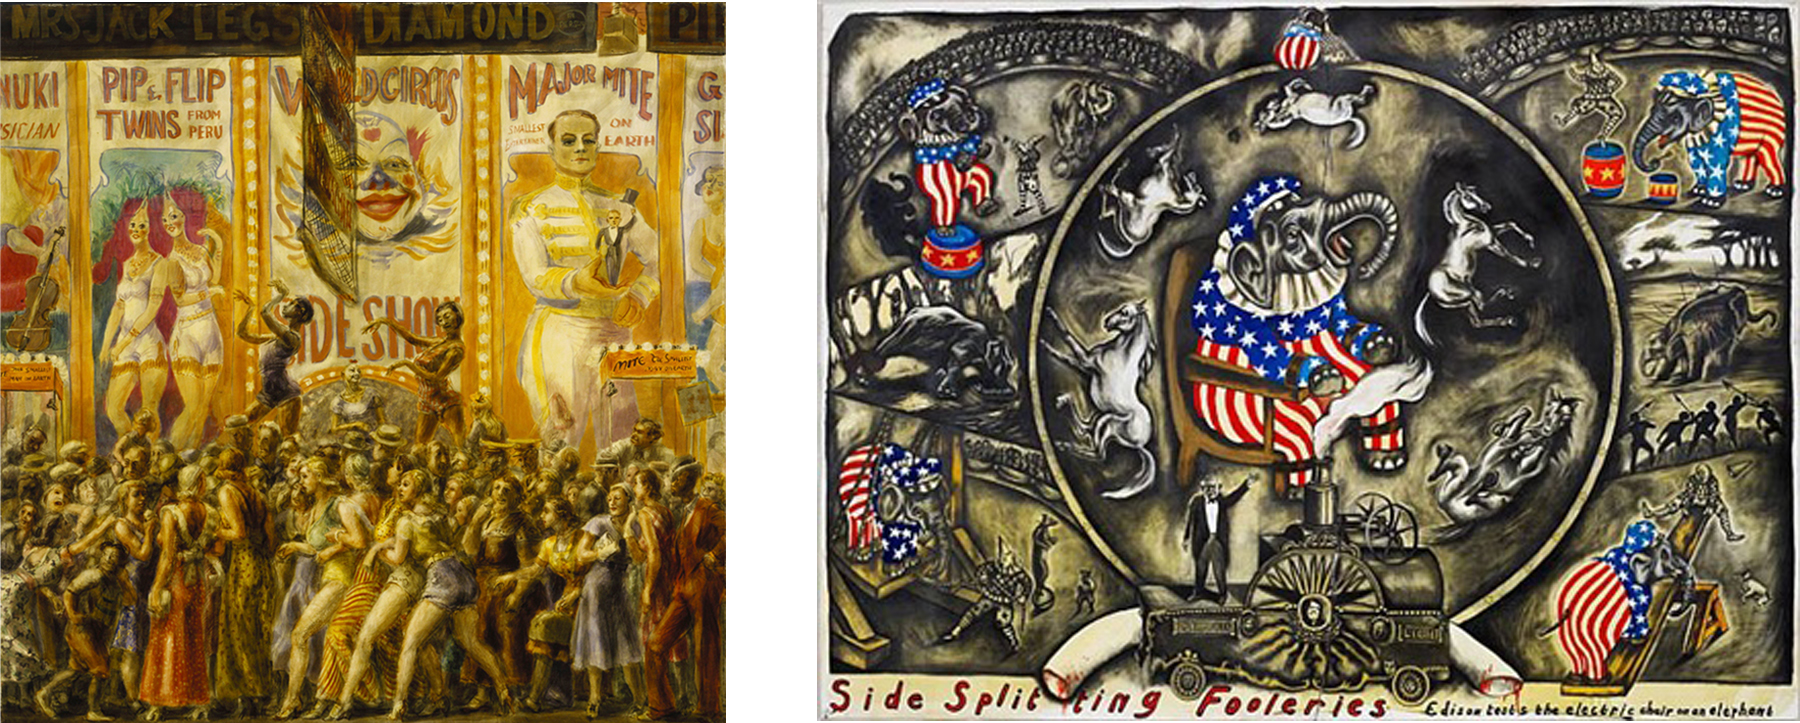 L: Reginald Marsh, Pip and Flip, 1932. Tempera on paper mounted on canvas, 48 ¼ x 48 ¼ in. Terra Foundation for American Art, Chicago. R: Sue Coe, Side Splitting Fooleries: Edison Tests the Electric Chair on an Elephant, 2007, graphite, gouache, and watercolor on board, 40 x 54 ½ in. The Galerie St. Etienne, New York